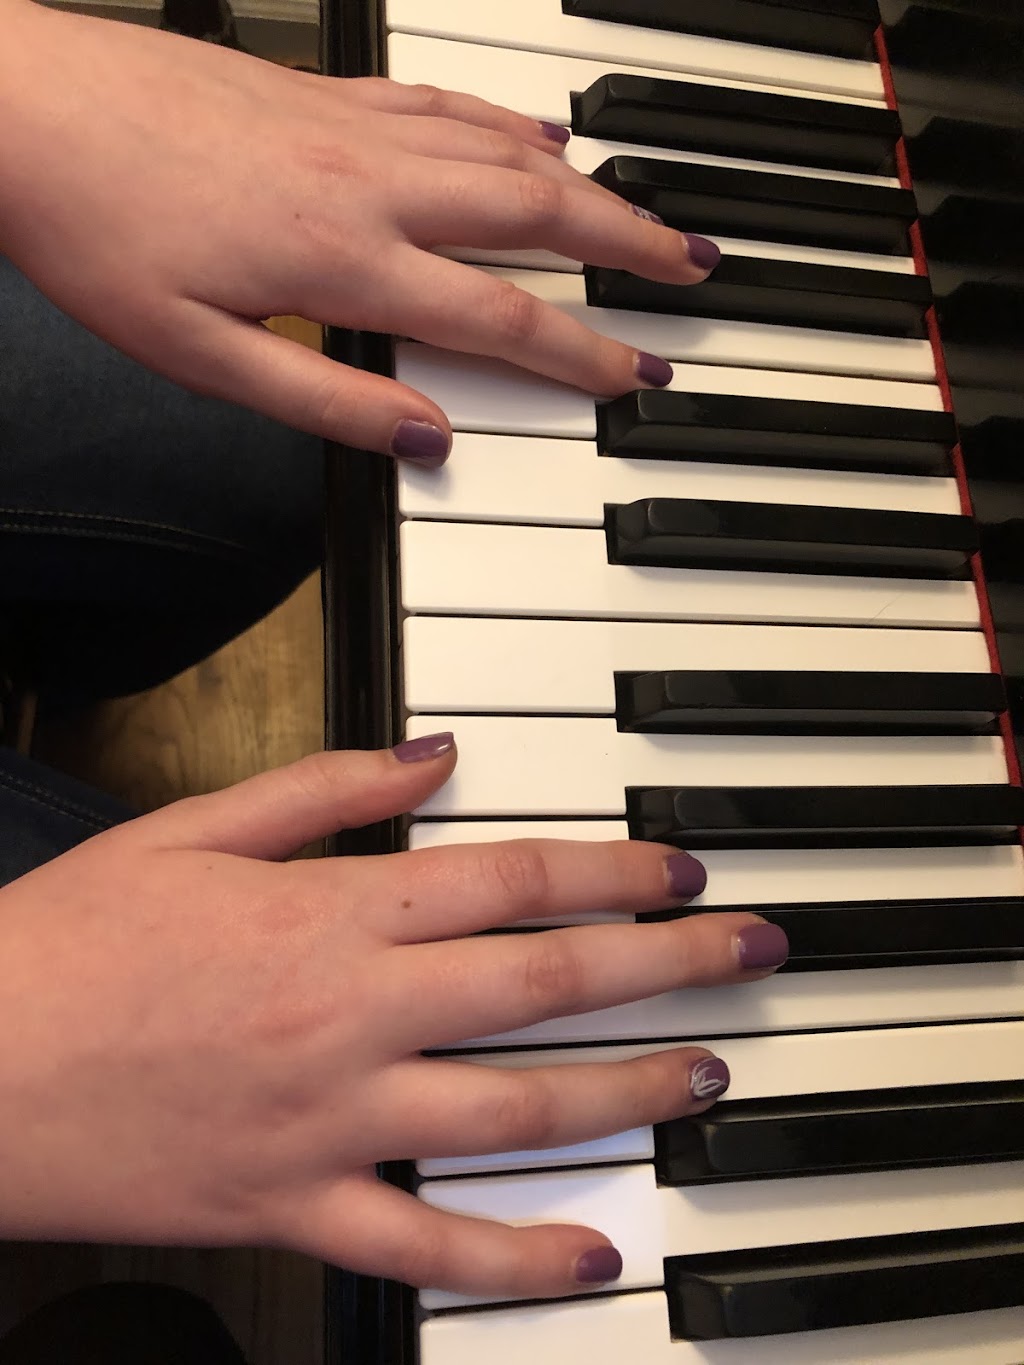 Piano Lessons and Music Theory by Joann DiGiulio | 22 Cedar Terrace W, Glenwood, NJ 07418 | Phone: (973) 670-5583